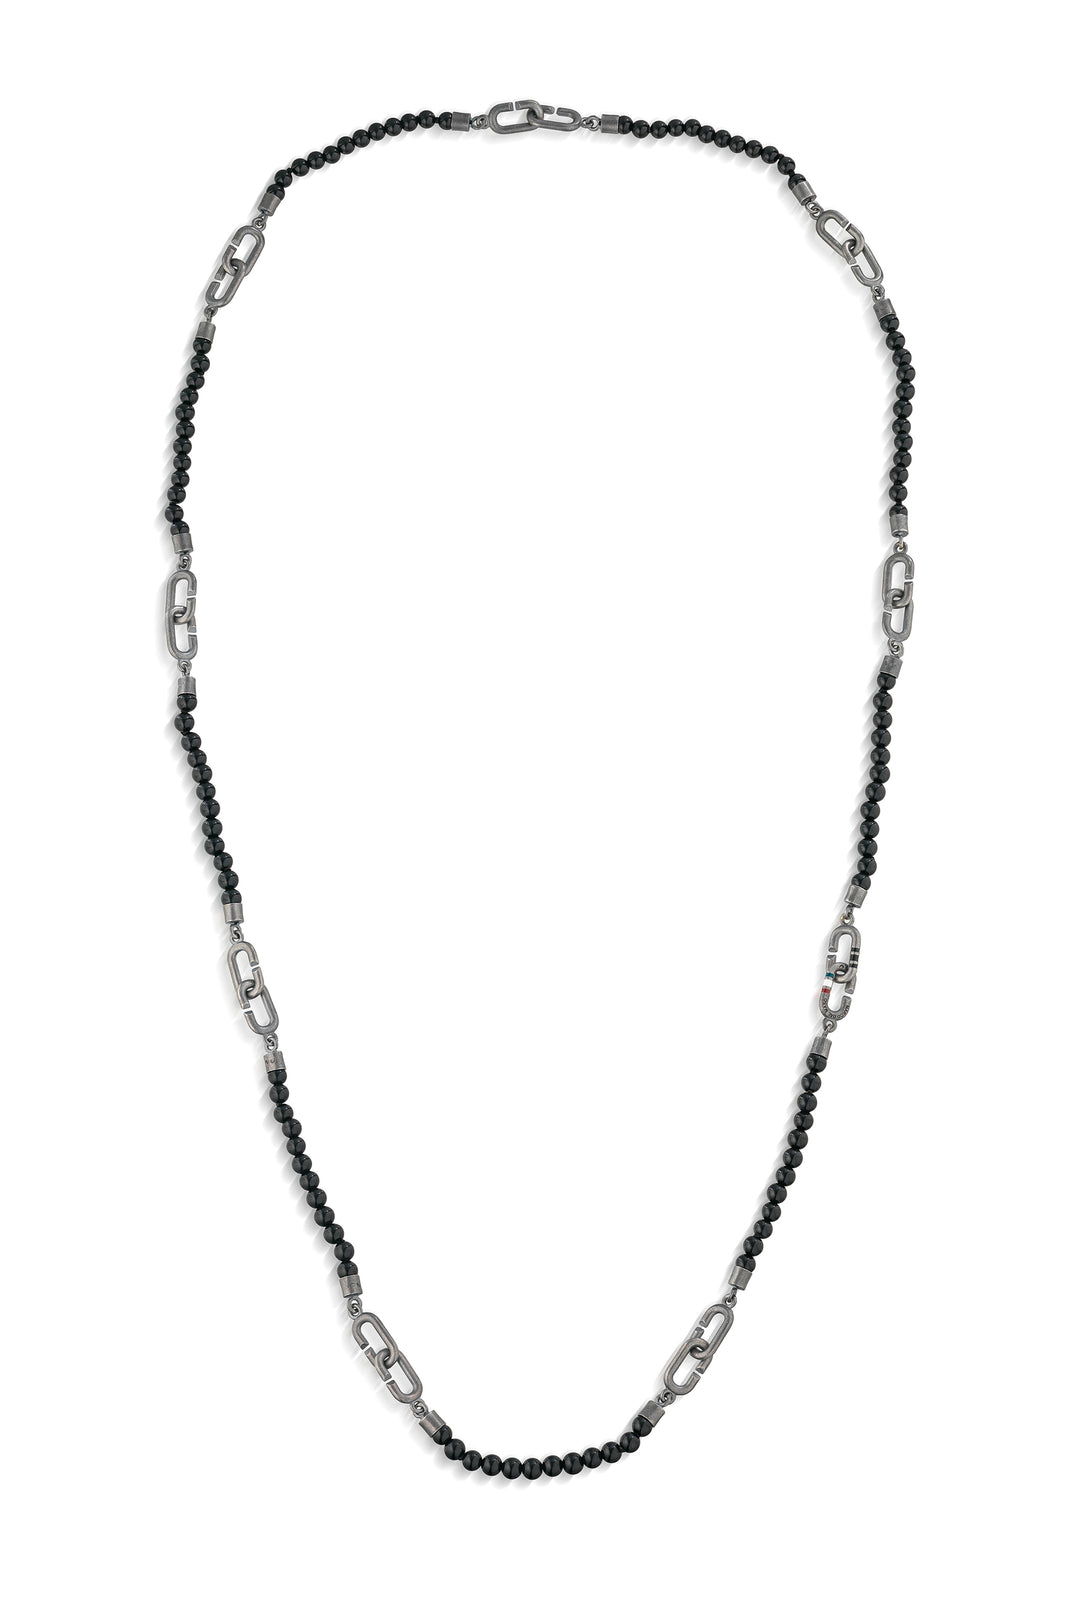 THE LINK Beaded Onyx Chain